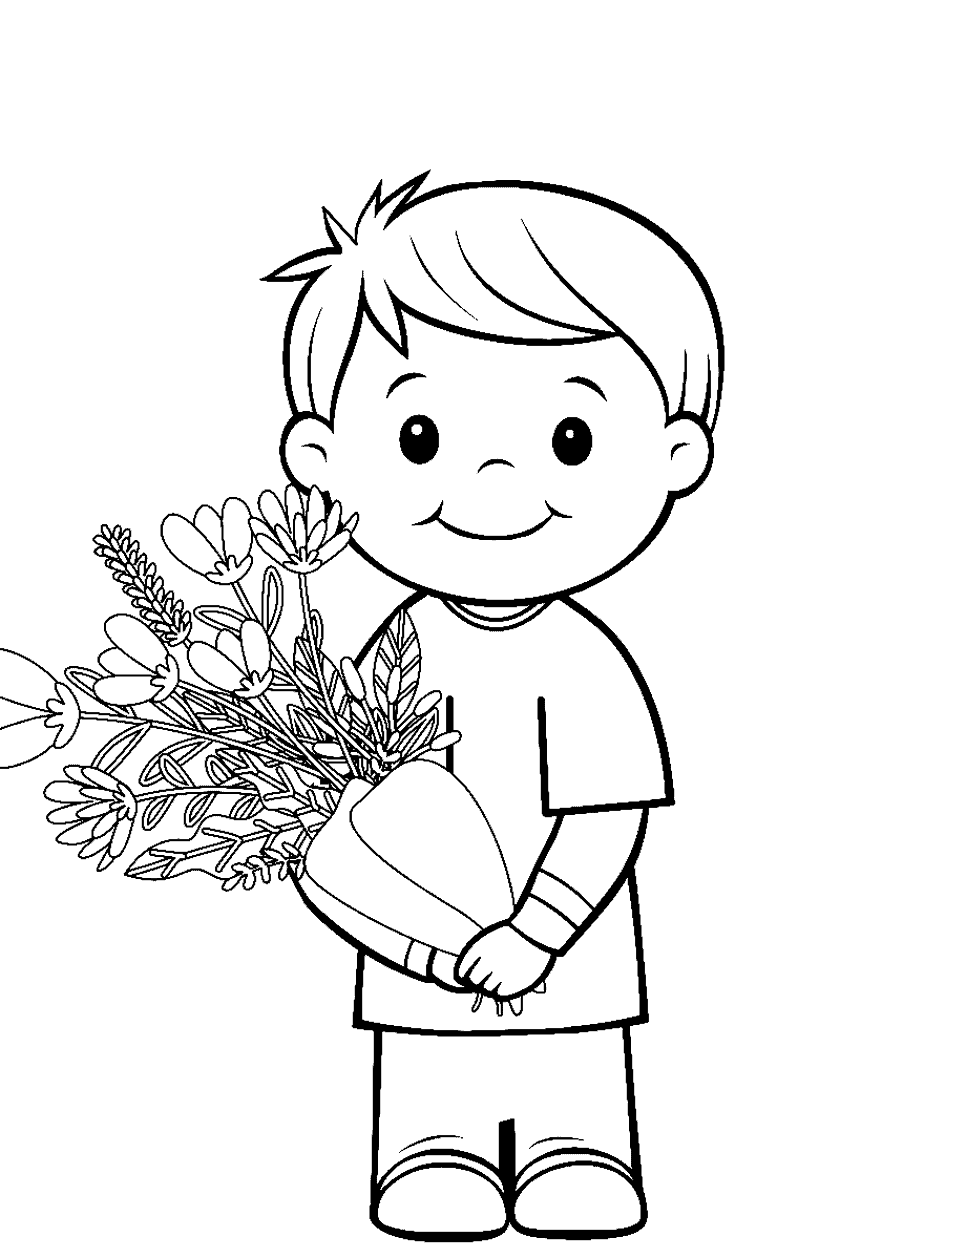 Boy with a Bouquet Coloring Page - A young boy holding a bouquet of flowers.